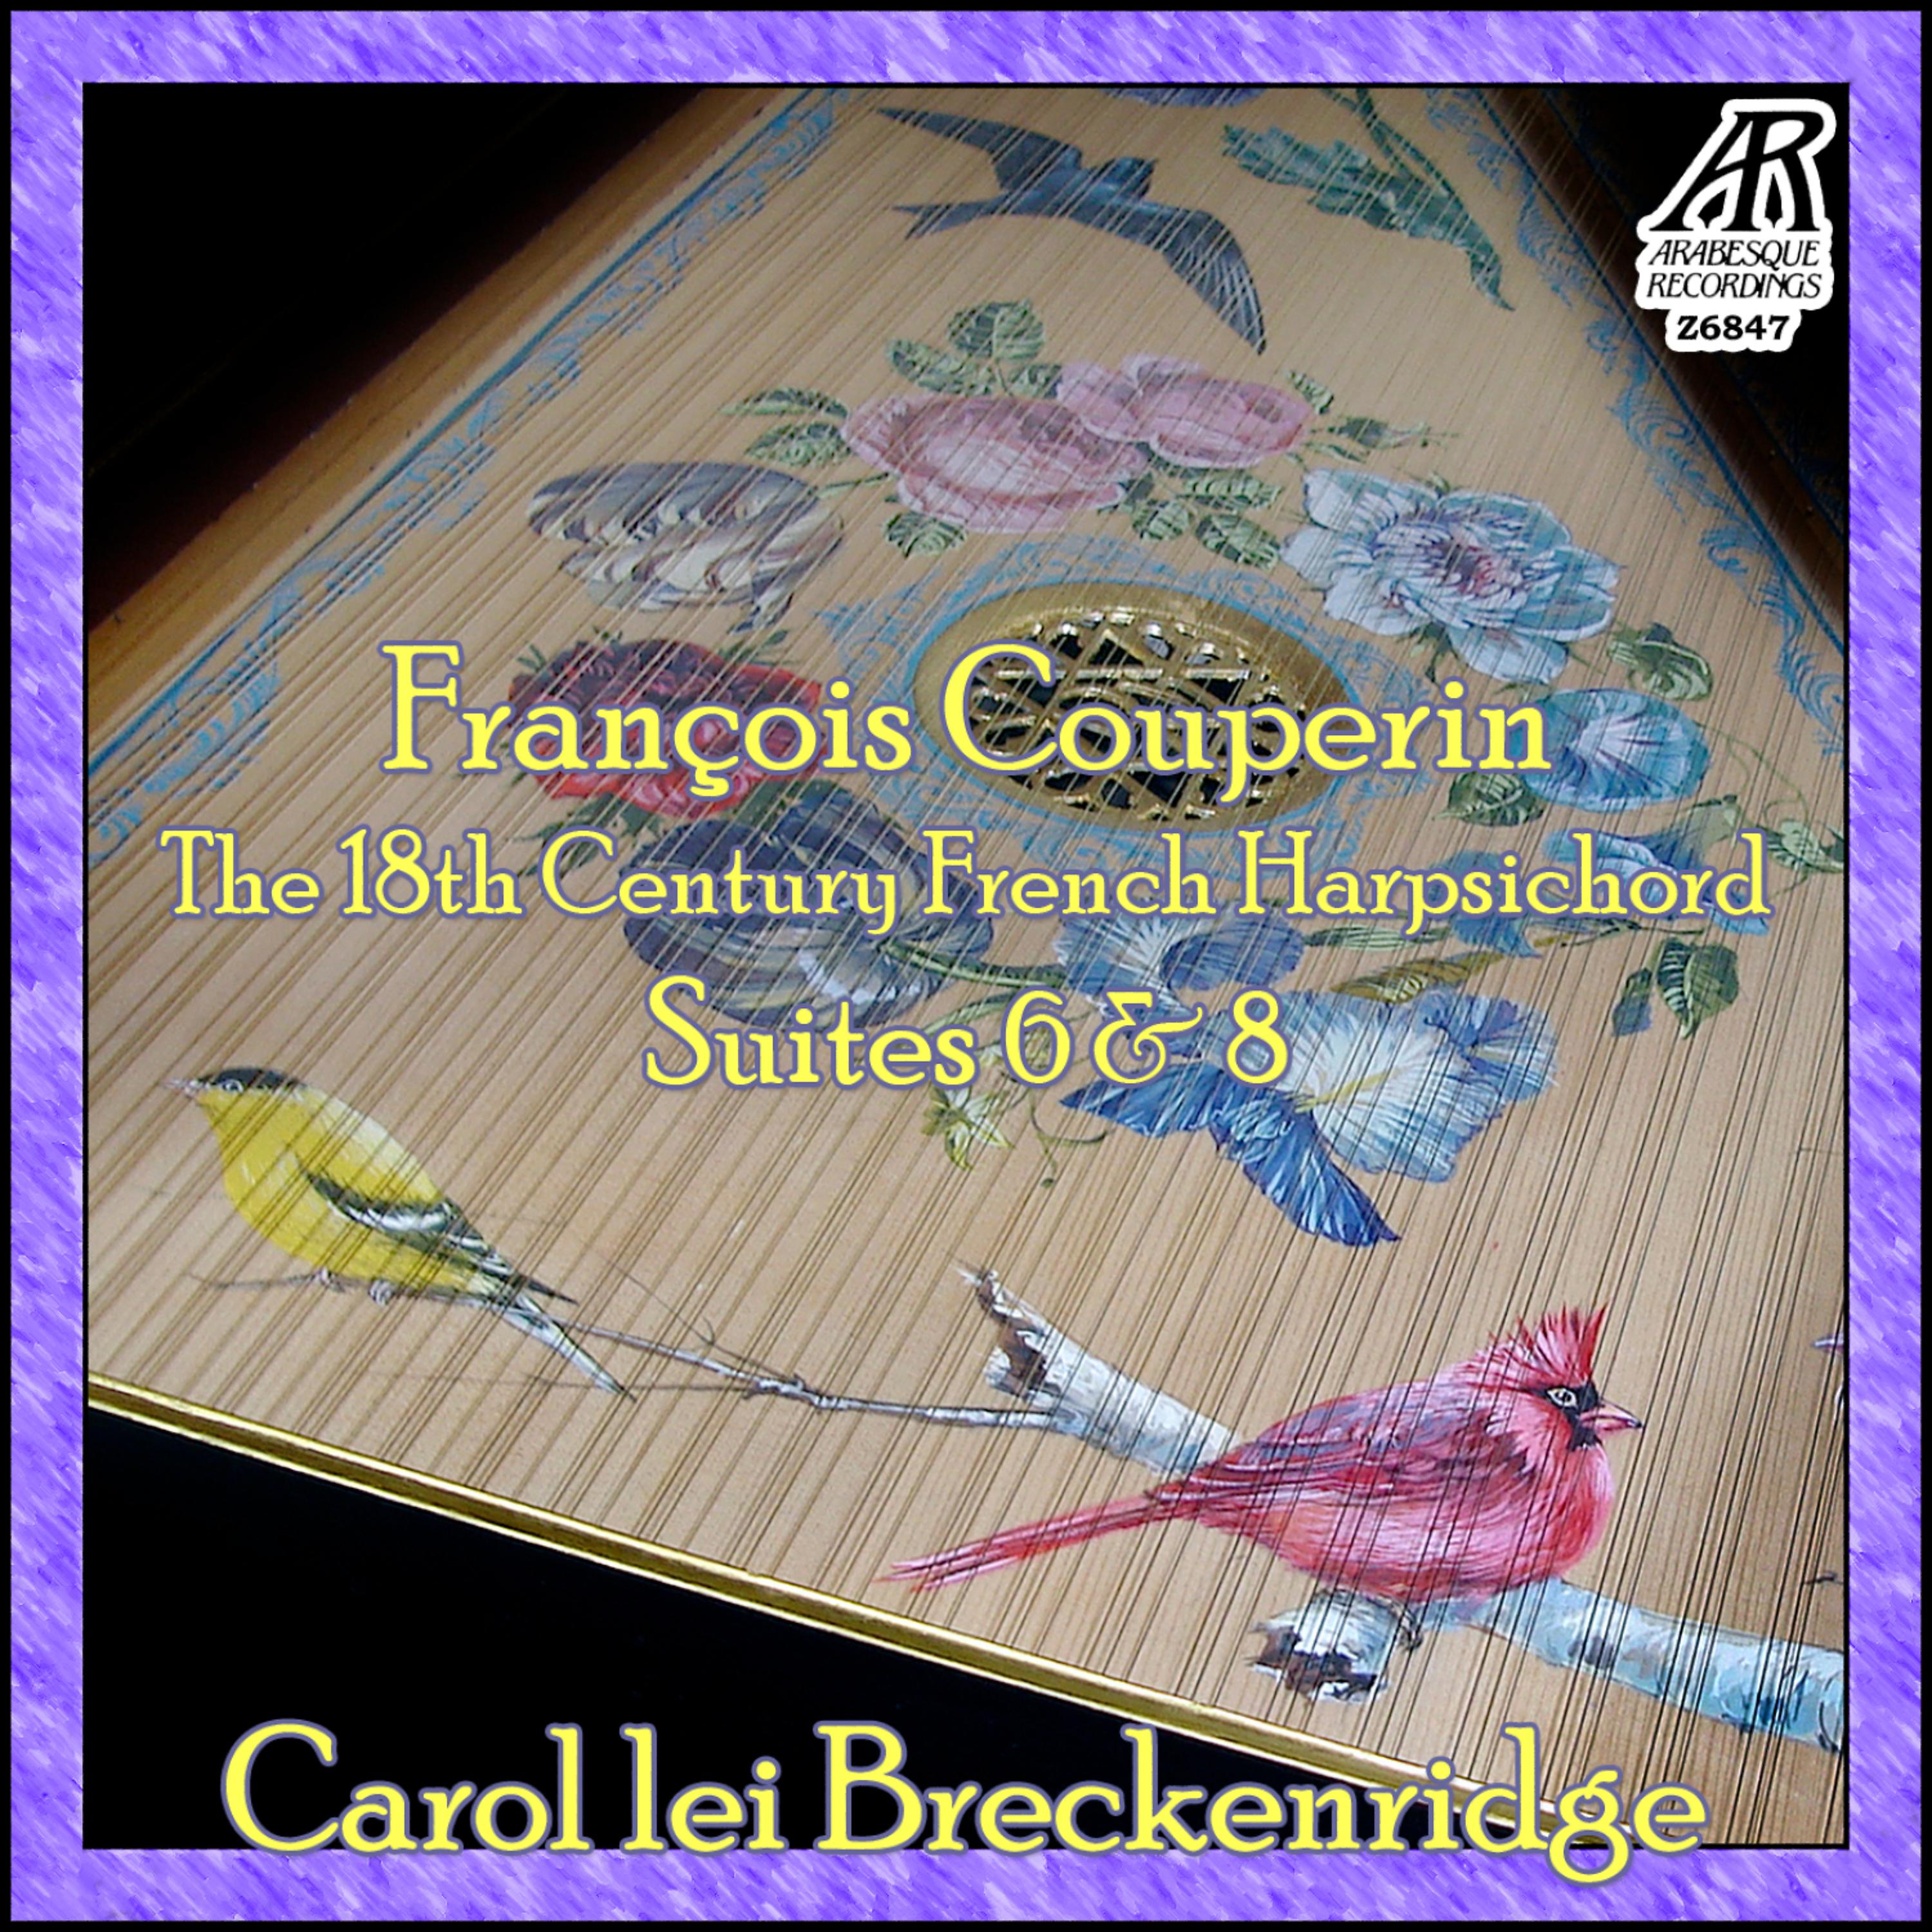 Постер альбома François Couperin - The 18th Century French Harpsichord - Suites 6 & 8